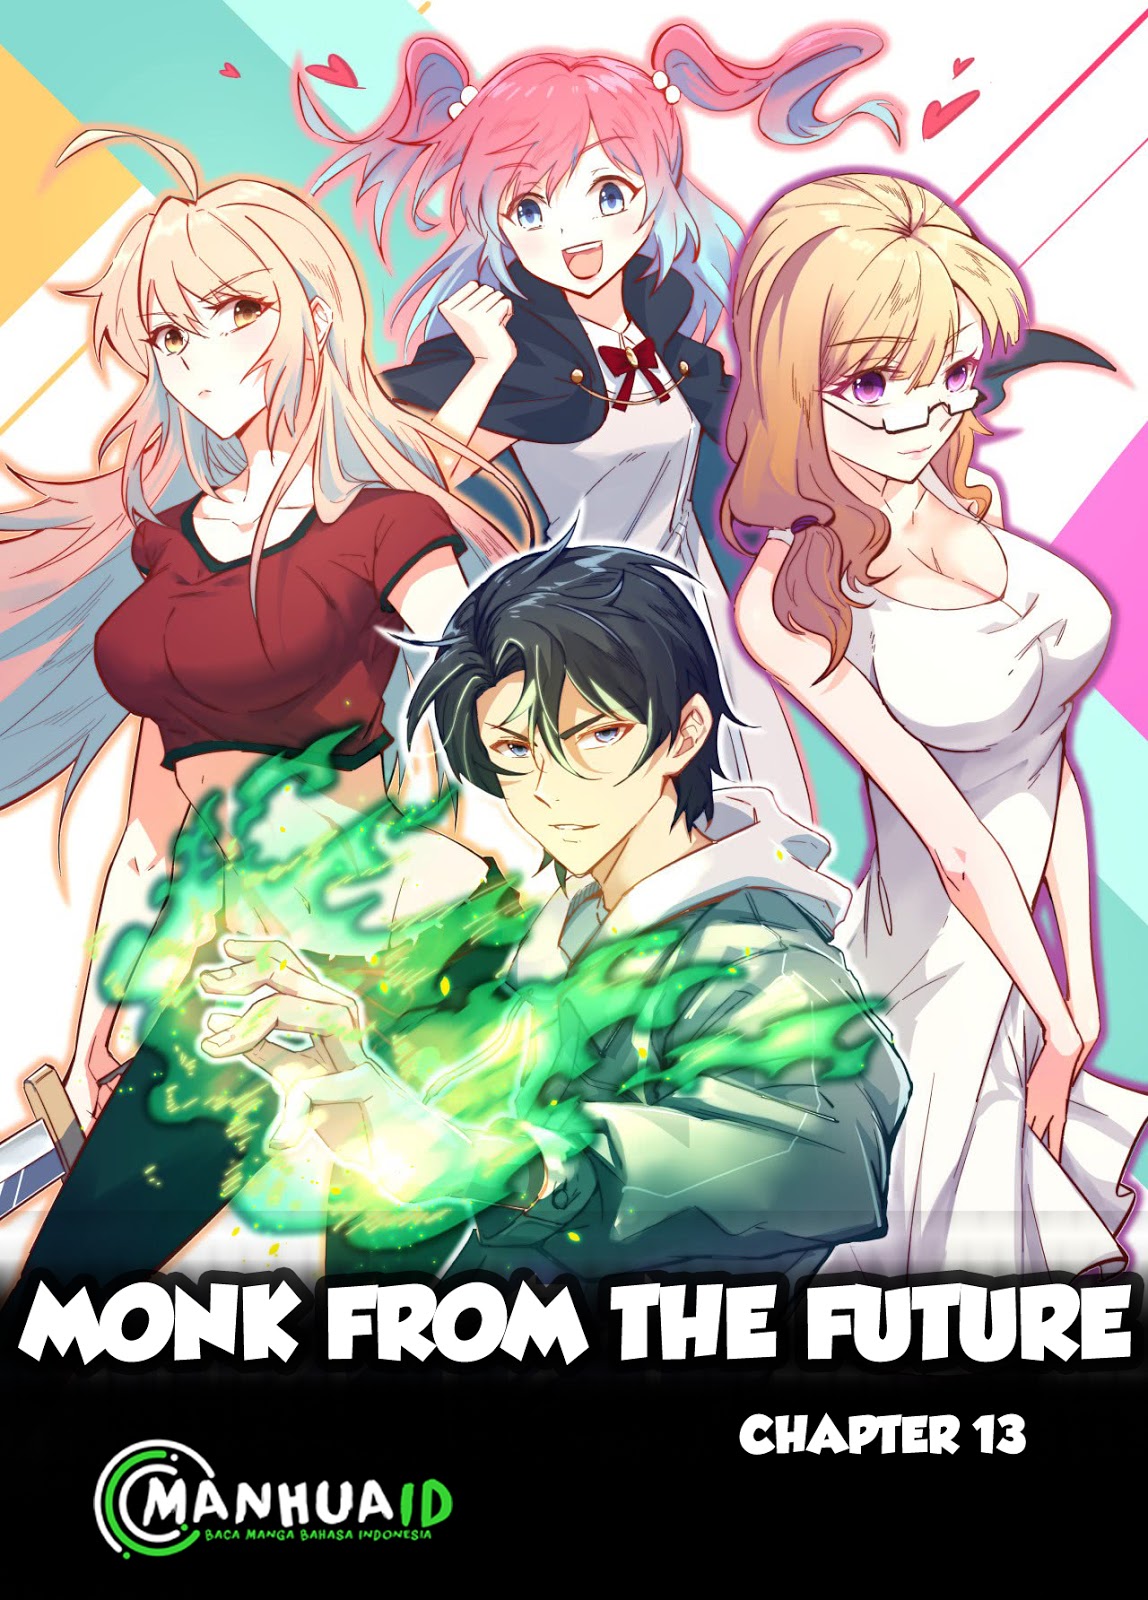 Monk From the Future Chapter 13